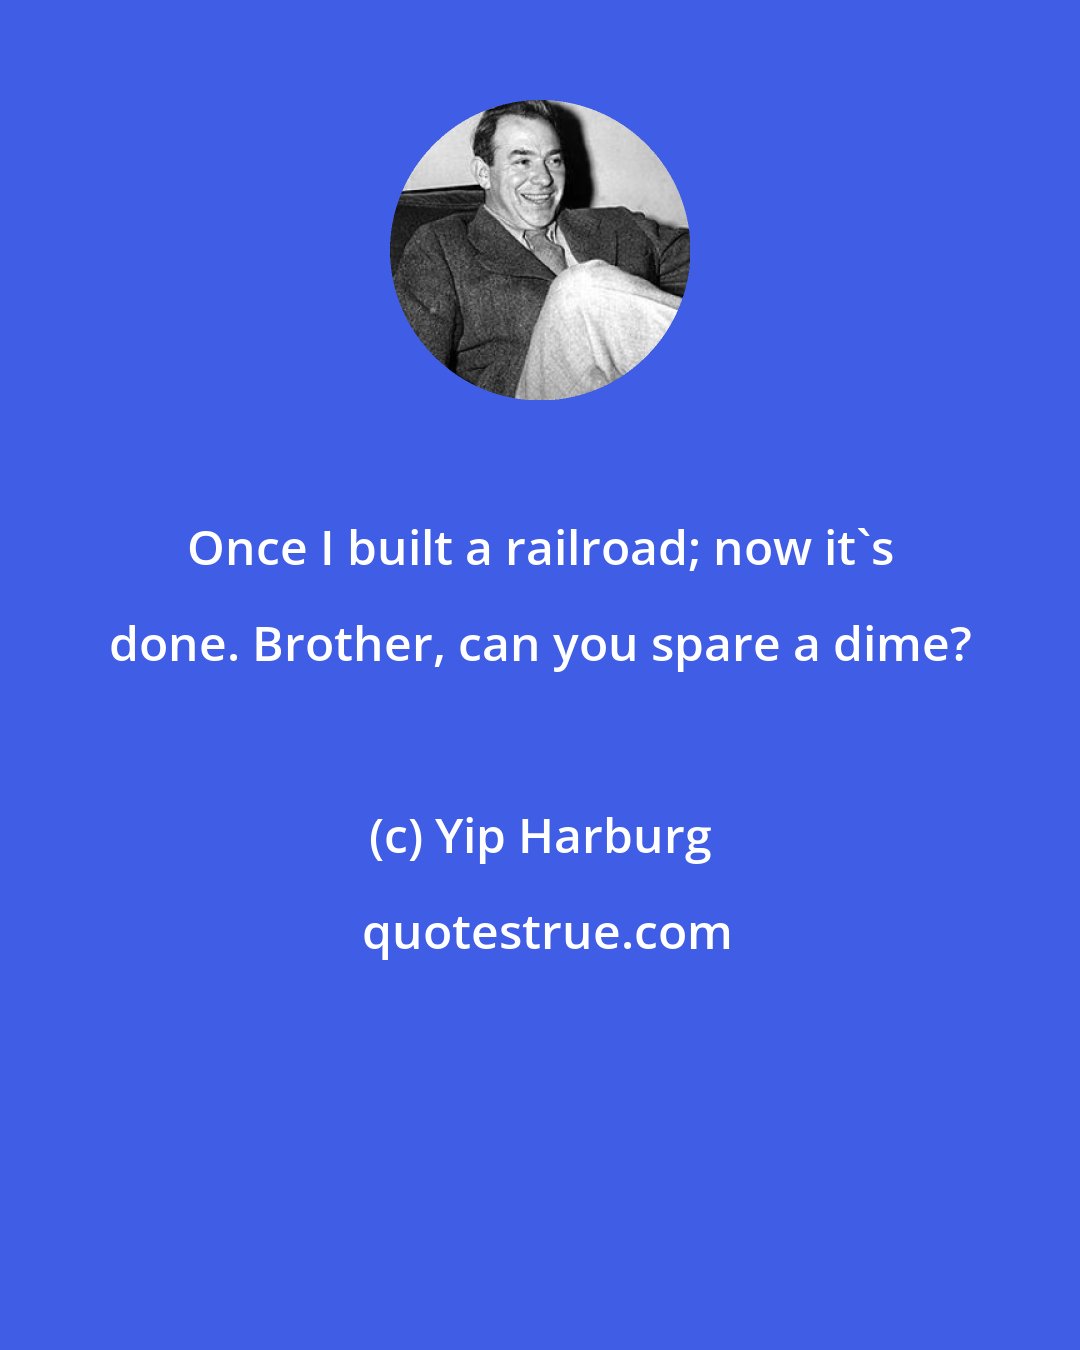 Yip Harburg: Once I built a railroad; now it's done. Brother, can you spare a dime?